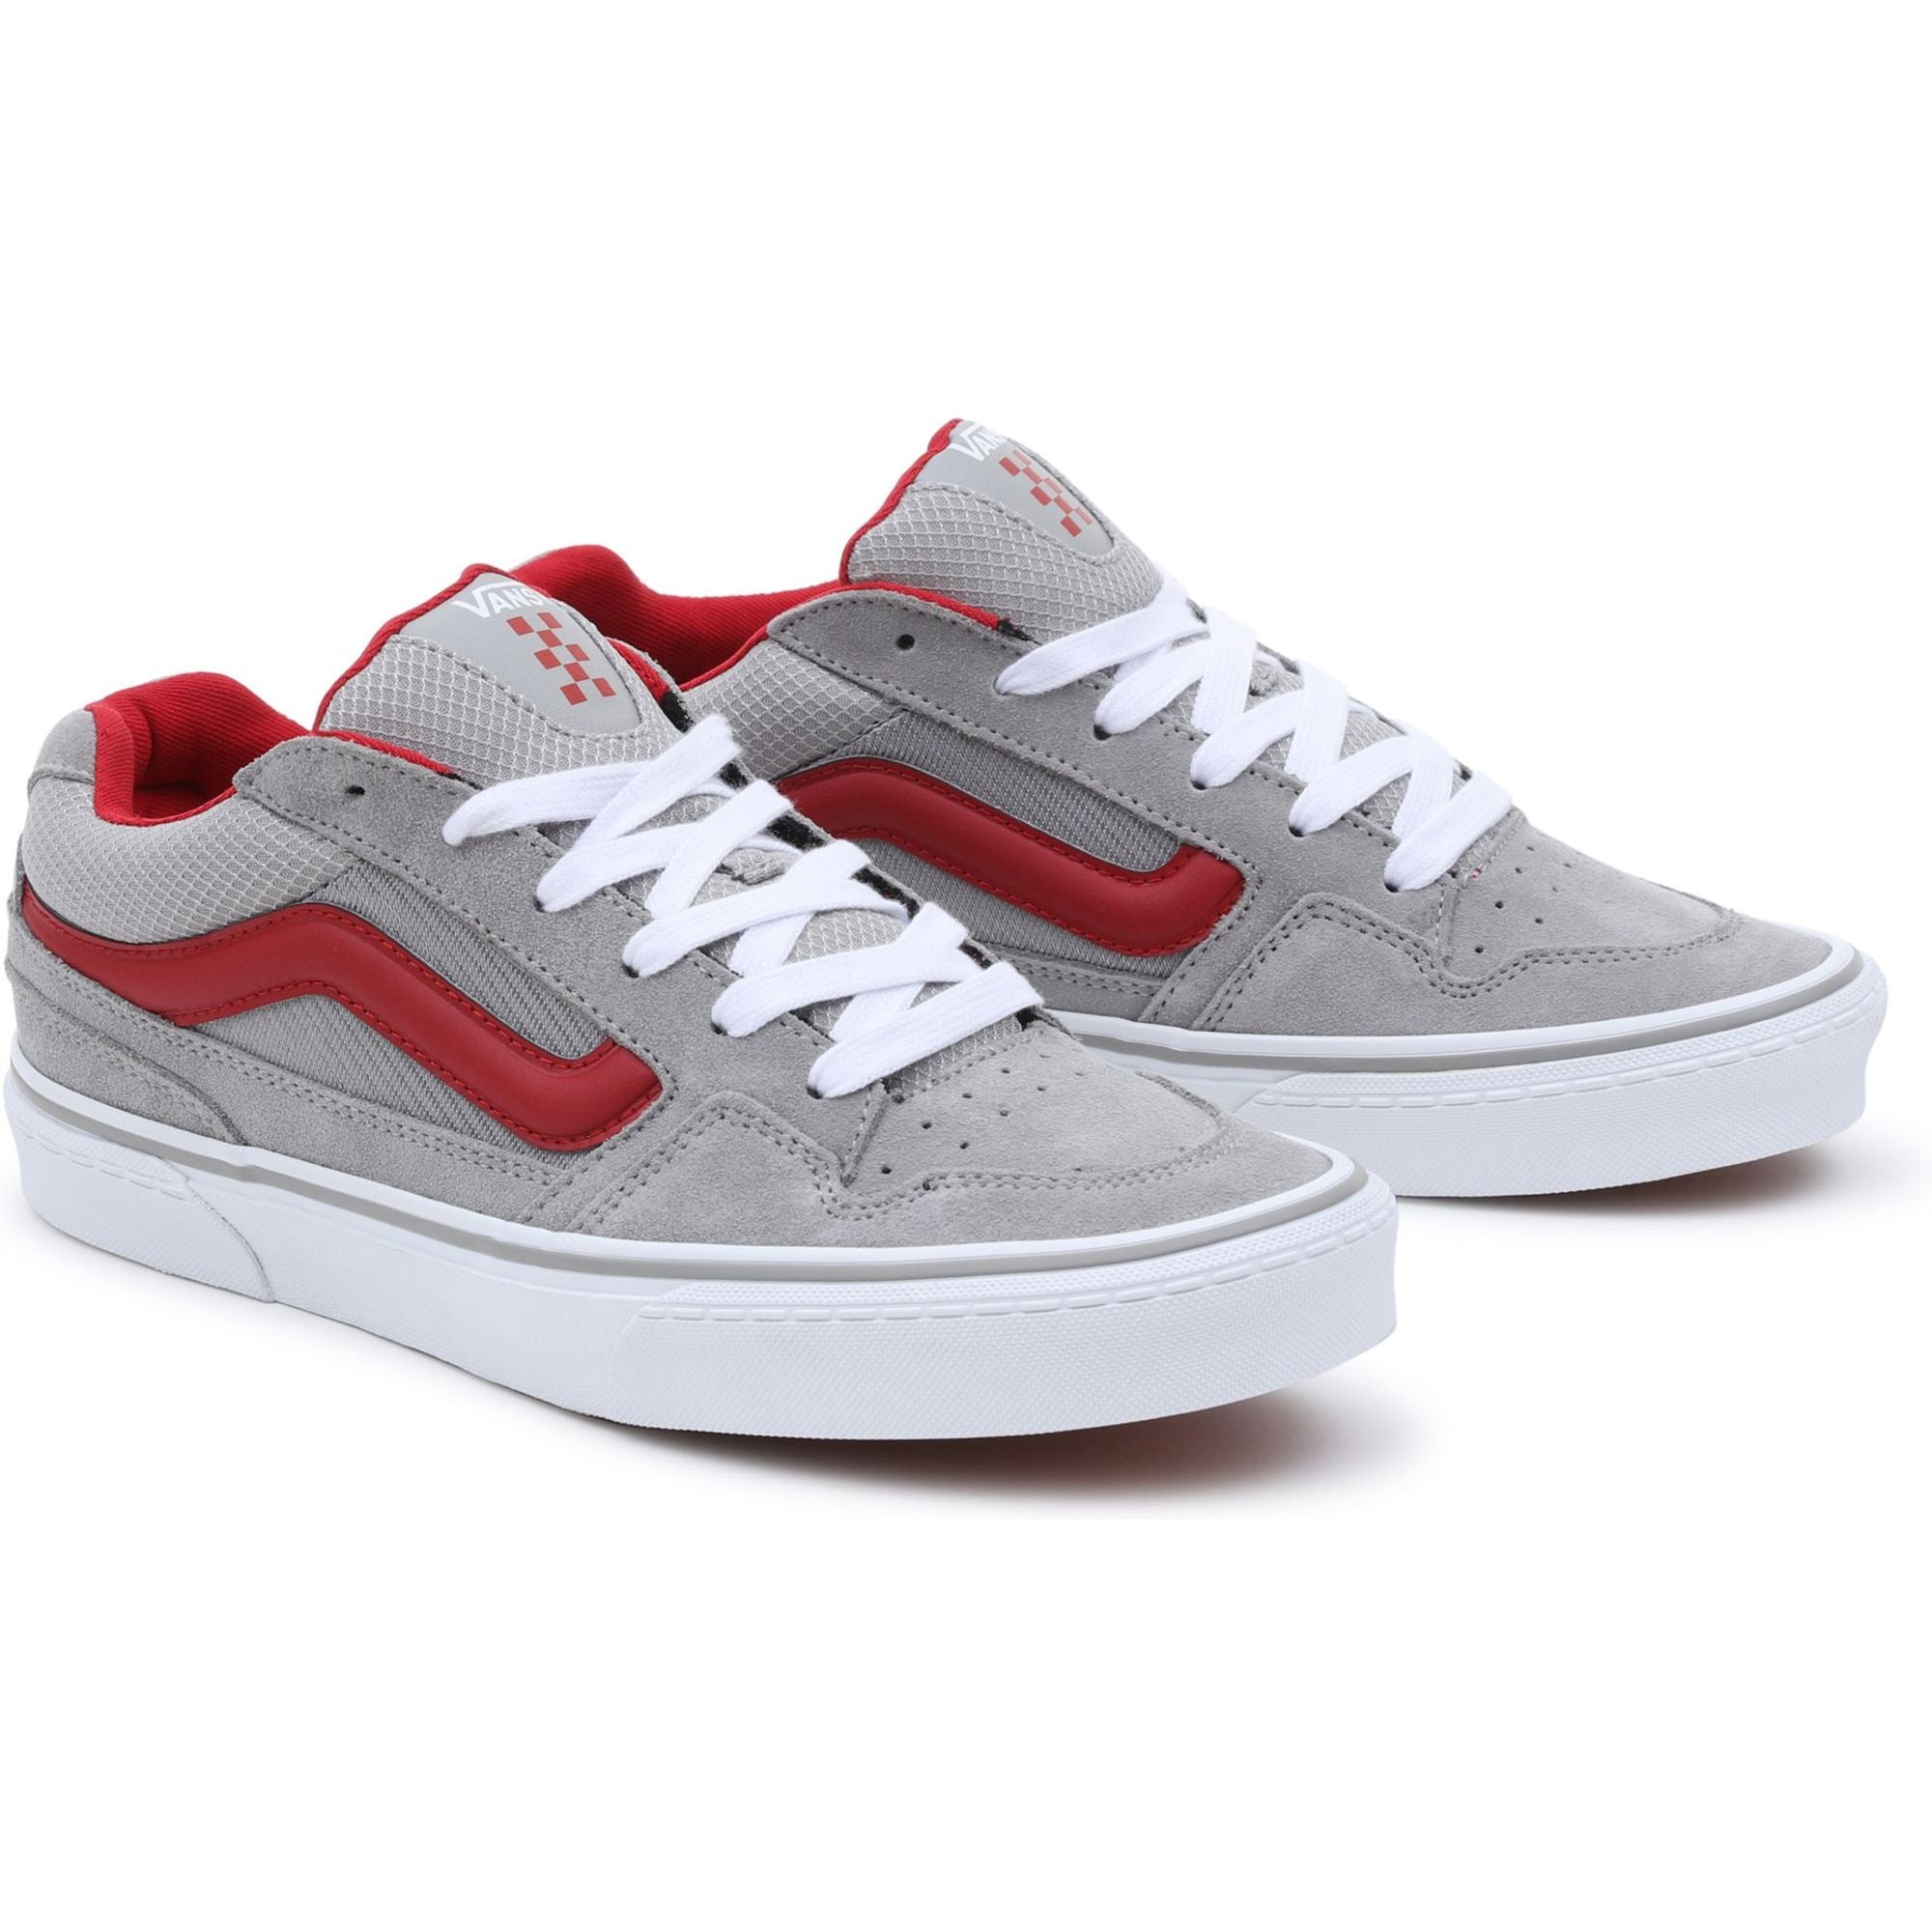 Caldrone Charcoal/Red Suede Mesh Trainer